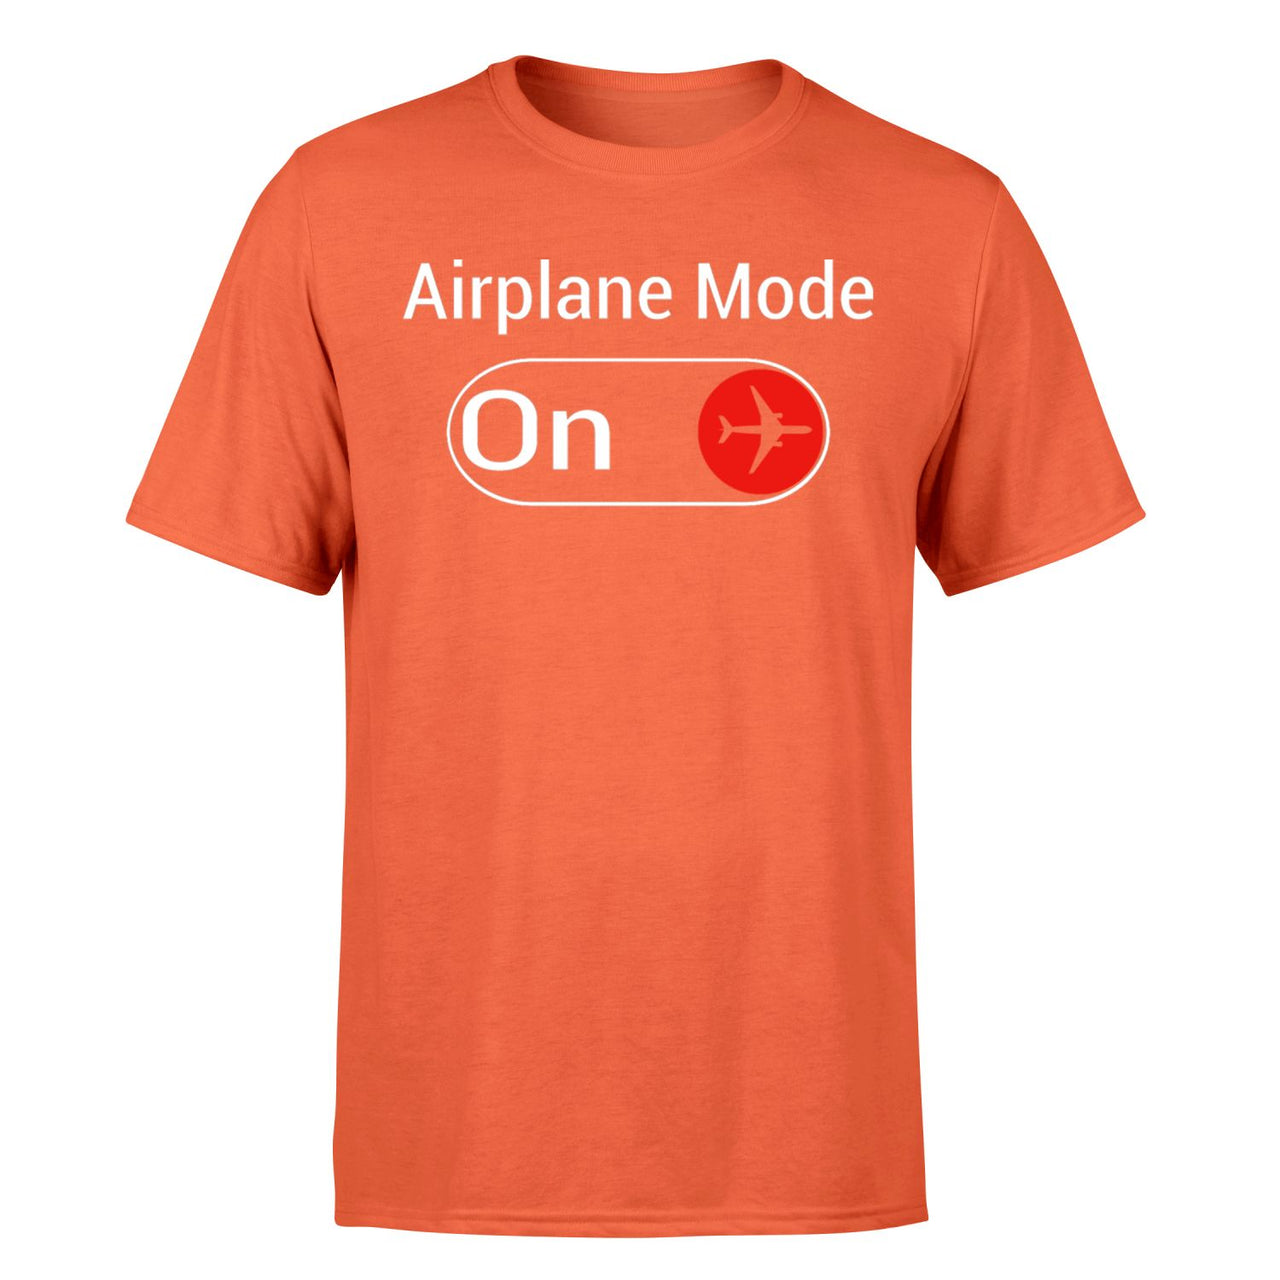 Airplane Mode On Designed T-Shirts